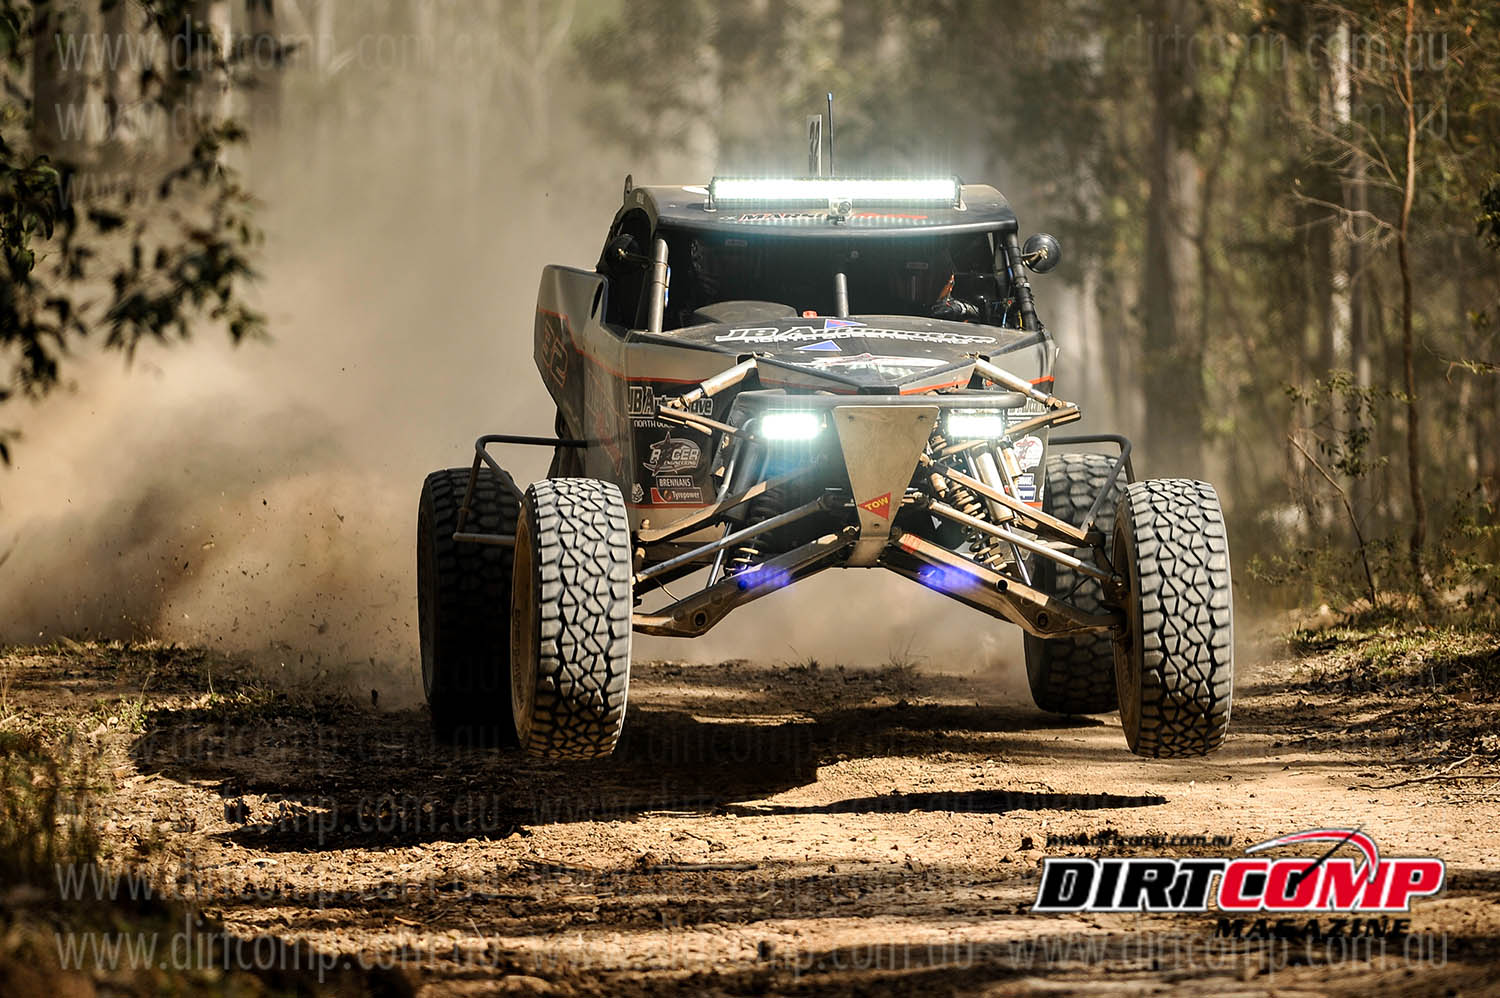 Michael Marson launching his Ford V8 powered Racer Pro-Buggy through the Coffs Forest in 2013